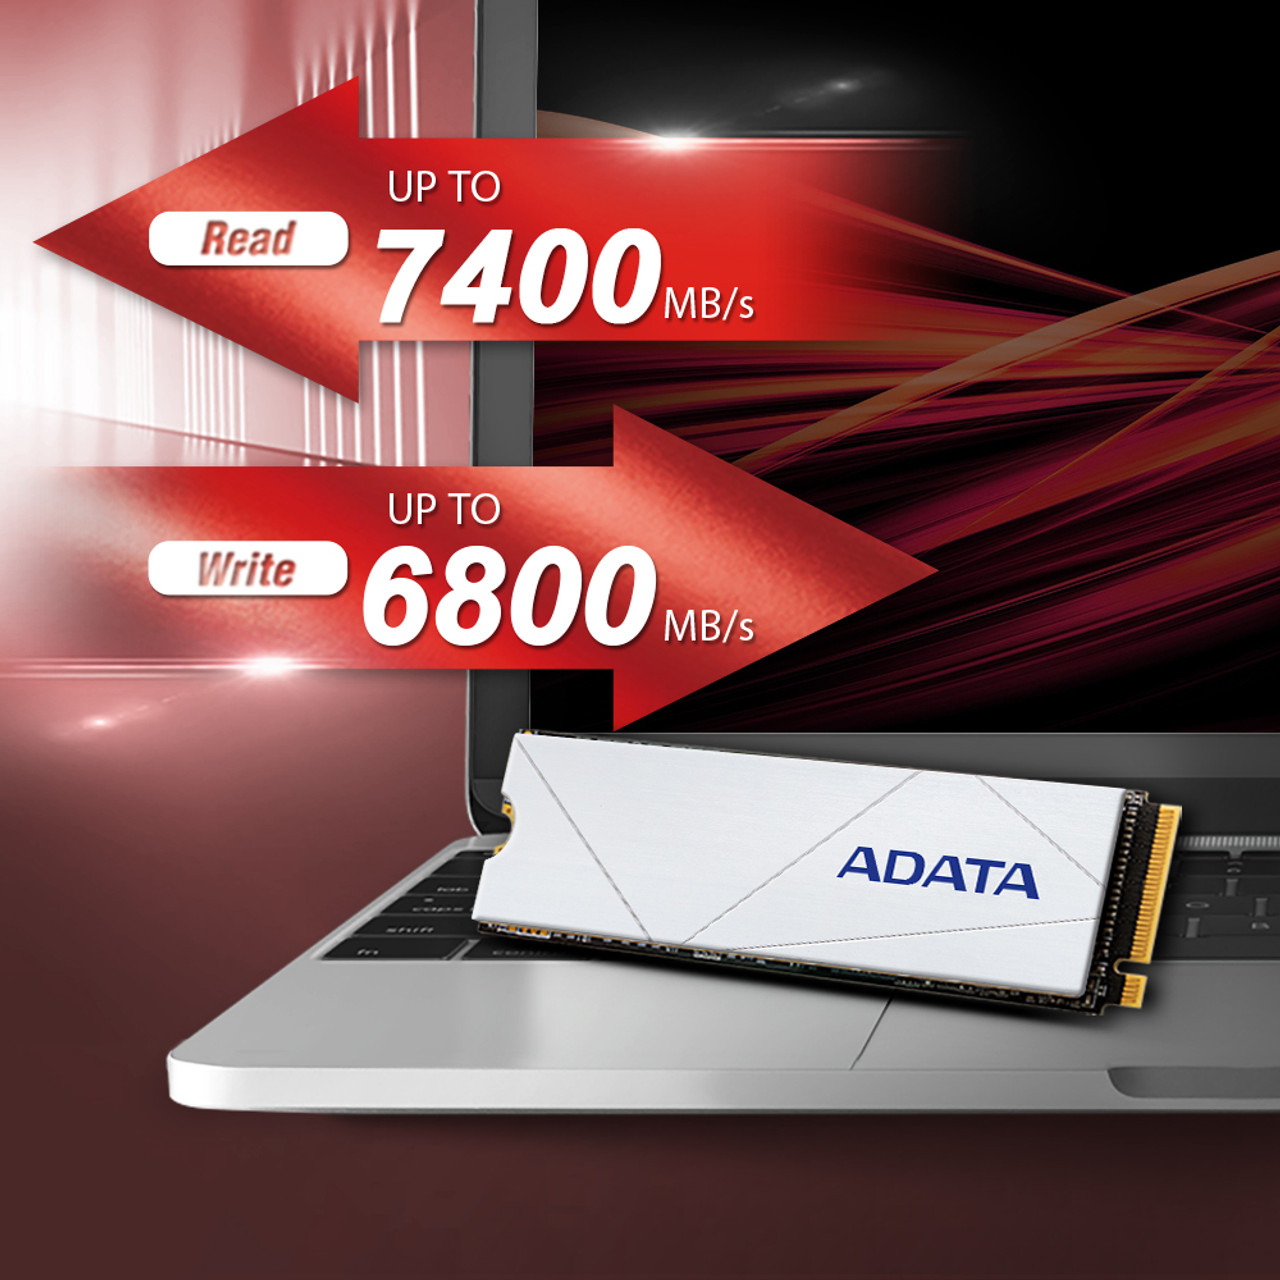 ADATA PREMIUM SSD FOR PS5 2TB PCIe Gen4 x4 M.2 2280 Internal Solid State  Drive | White SSD | Ideal for Gaming | PS5 Compatible - Innogrit IG5236 |  Up